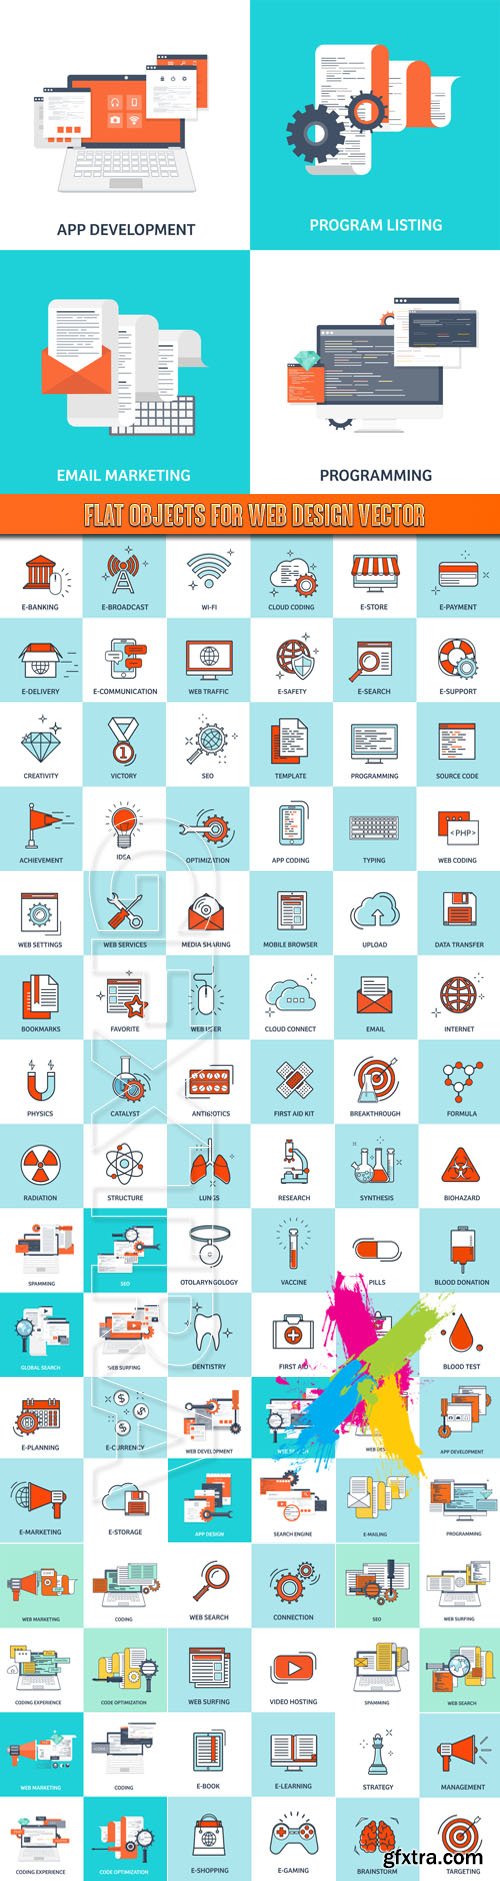 Flat objects for web design vector